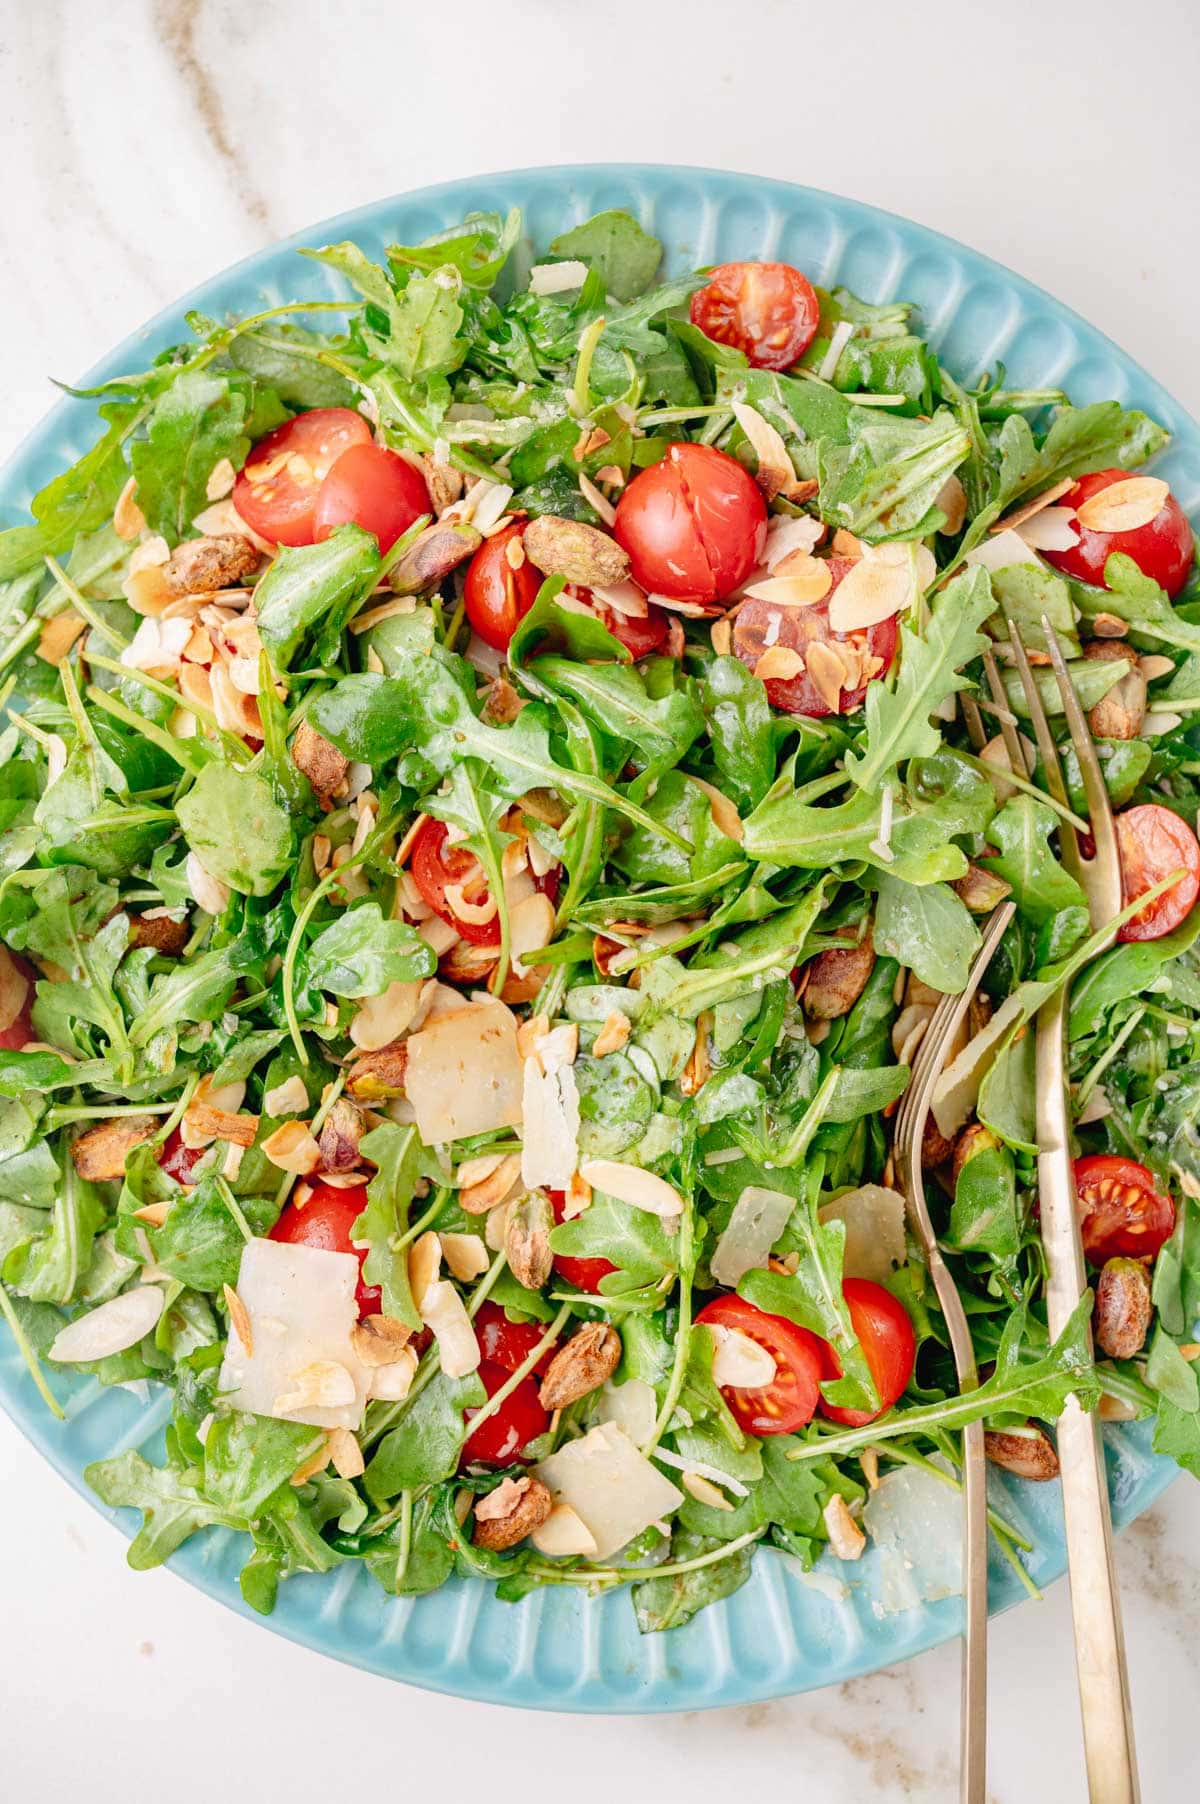 An overhead photo of arugula salad with tomatoes, nuts, and parmesan on a blue plate.